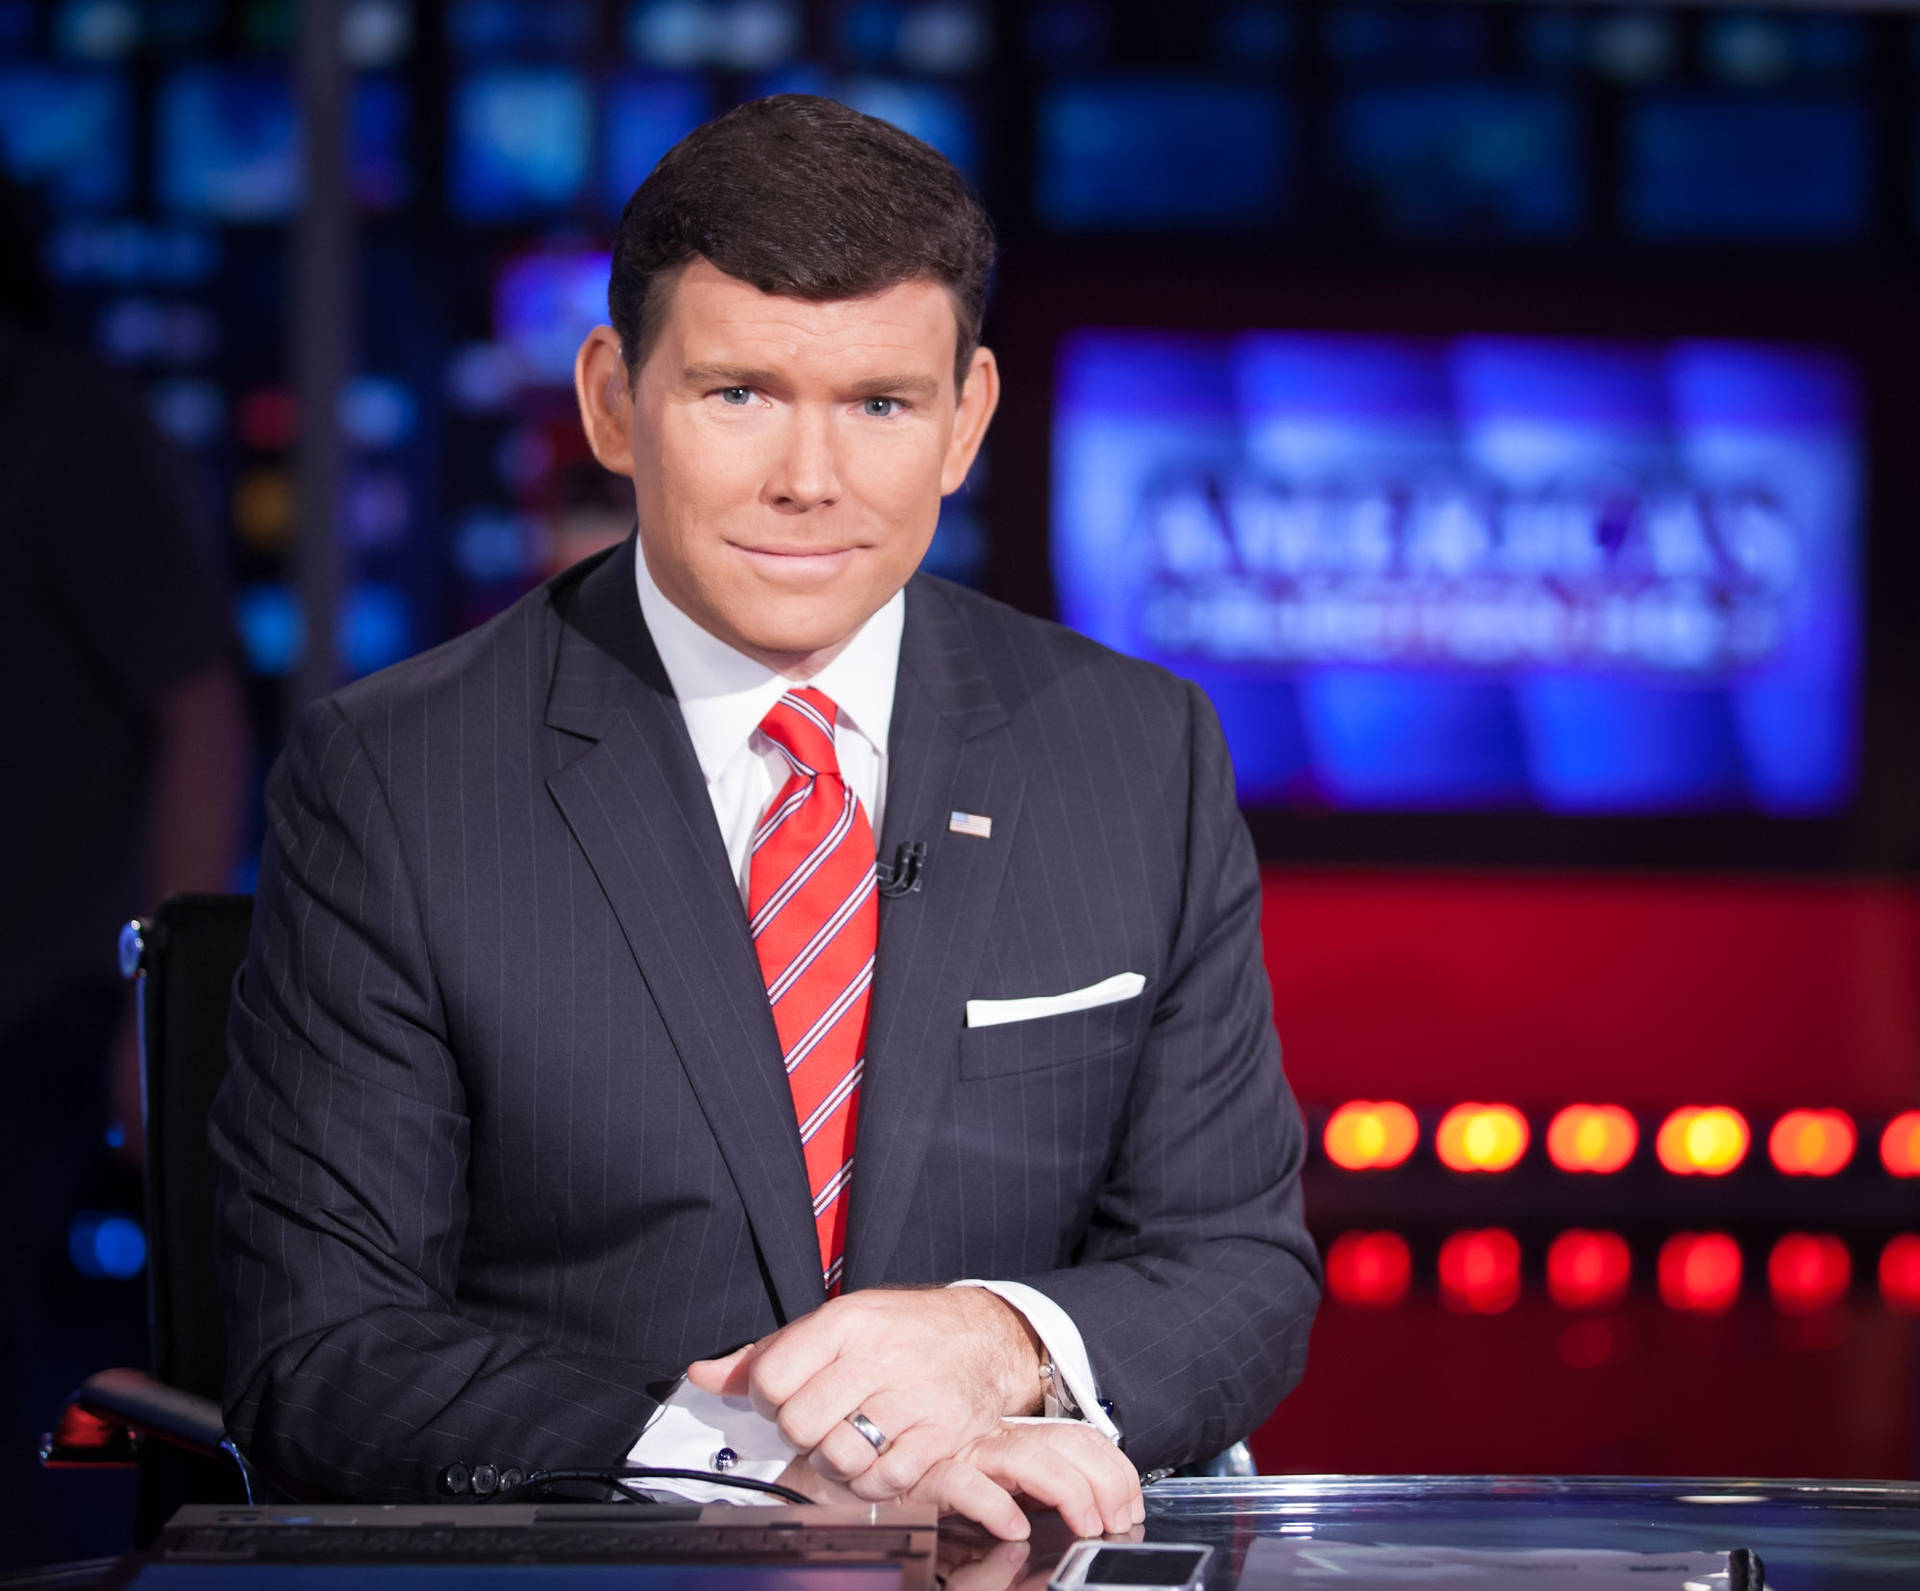 Foxnews Bret Baier Cannot Be Translated In Context Of Computer Or Mobile Wallpaper As It Is A Person's Name. However, If You Want To Translate The Phrase 